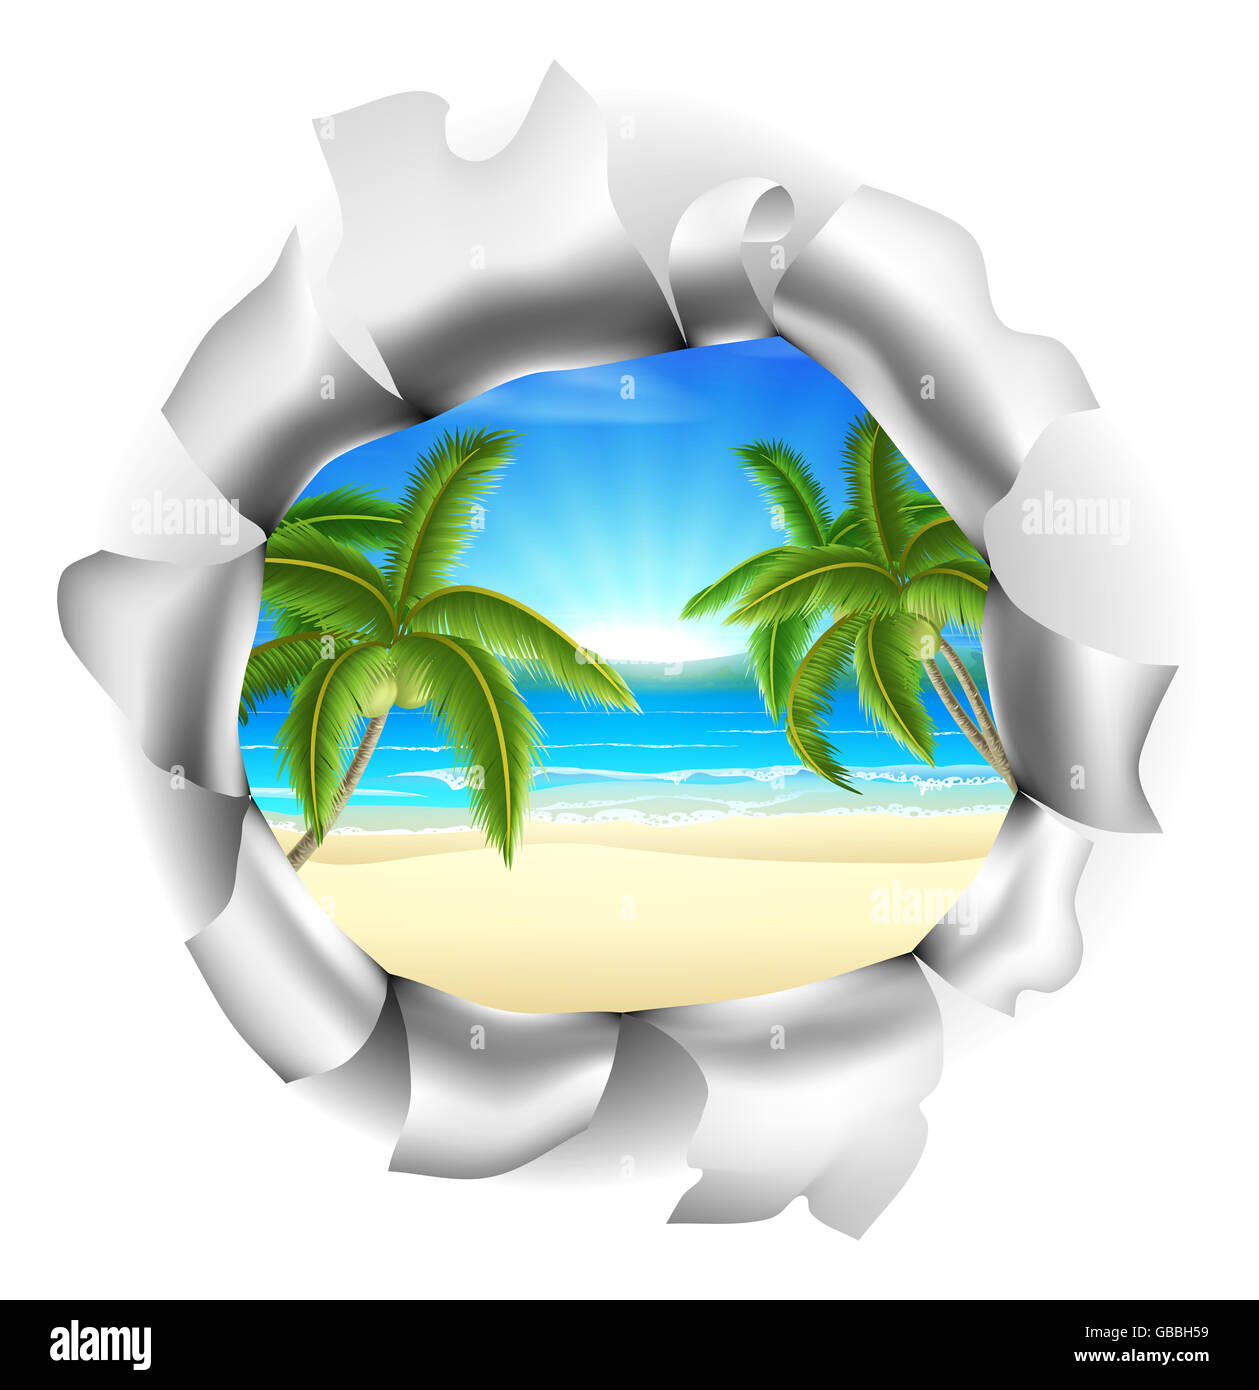 A tropical beach with palm trees visible through a hole. Concept for opportunity or a positive future, or just the chance of win Stock Photo